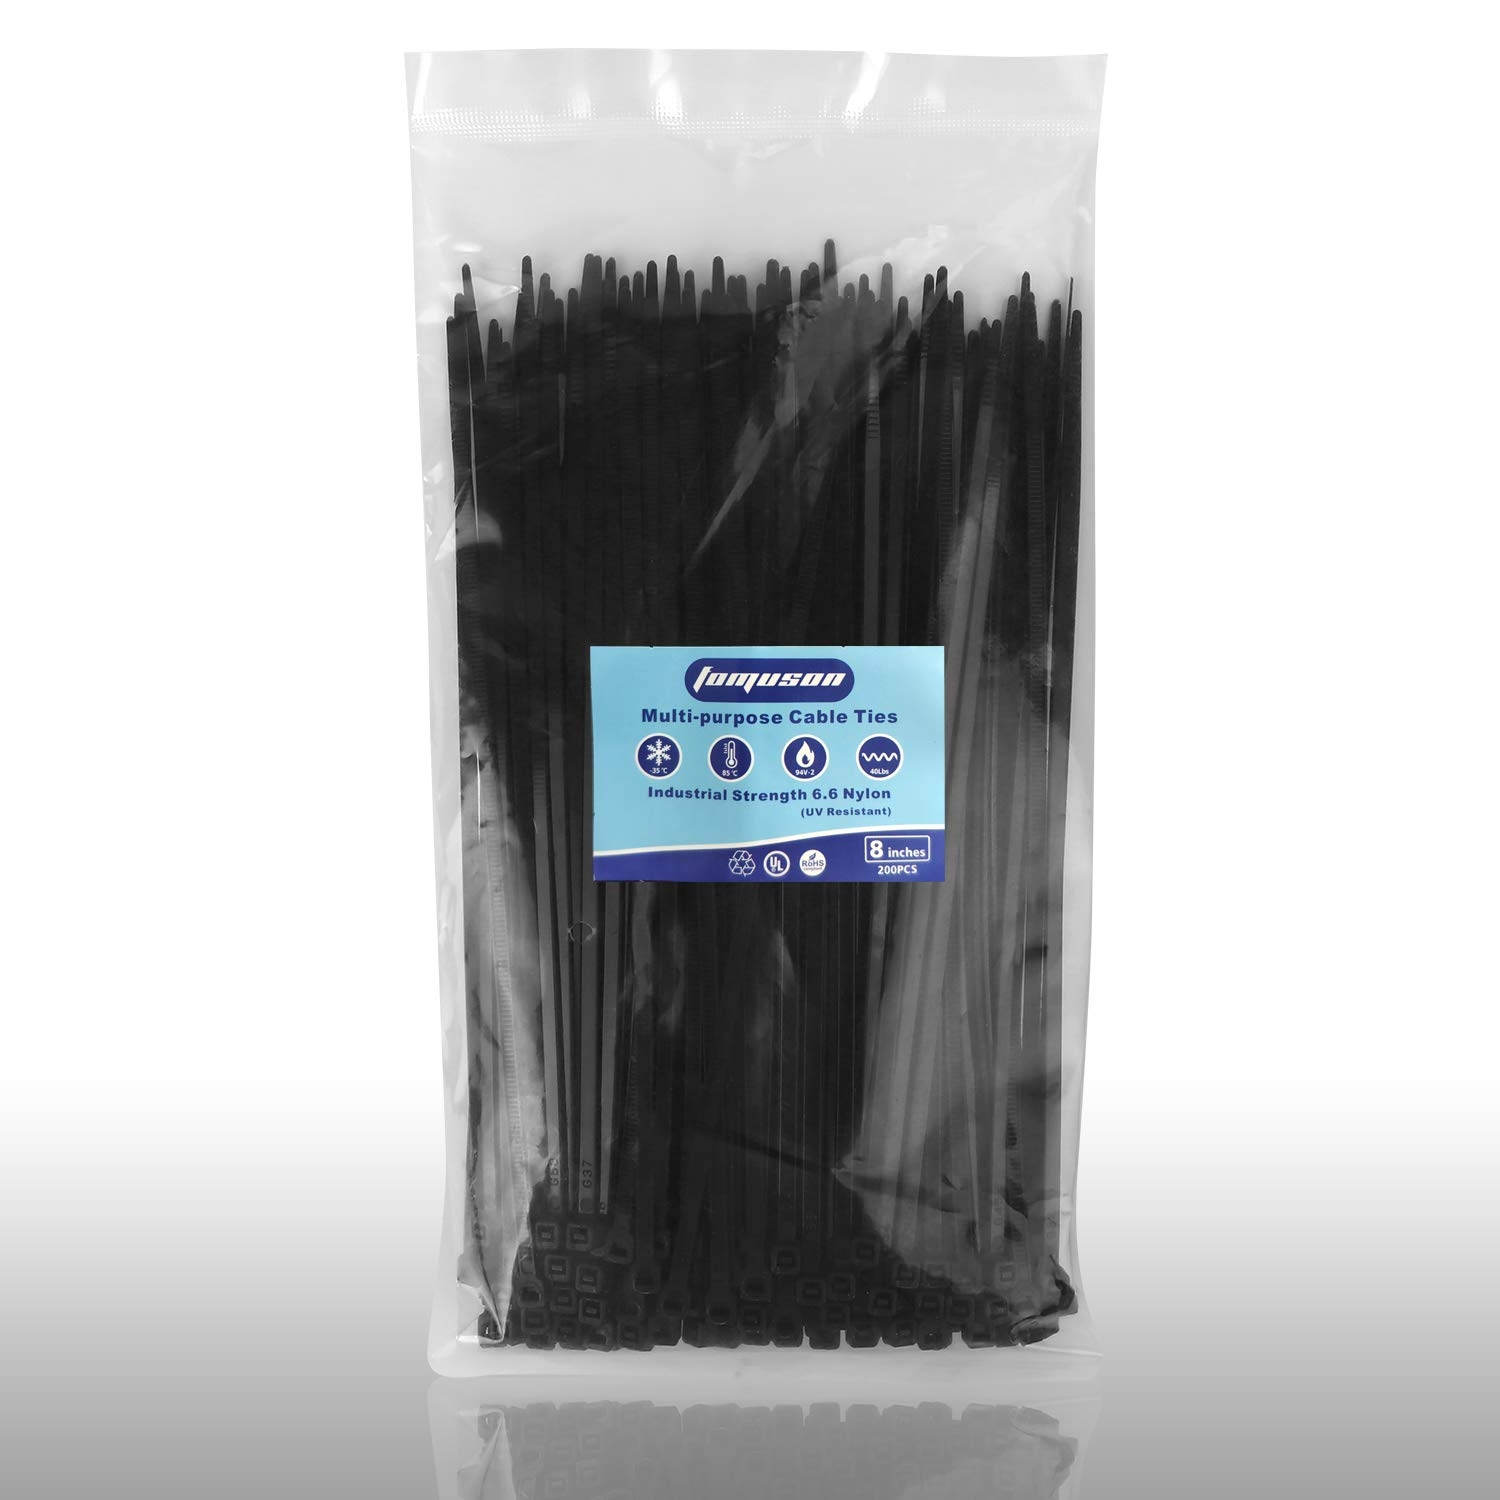 200 Pieces Zip Ties, Fomuson Nylon Cable Ties with 40lbs Tensile Strength, Self-Locking Plastic Wire Tie Wraps with Heat & UV Resistance for Indoor and Outdoor(8” x 0.15” / Black)